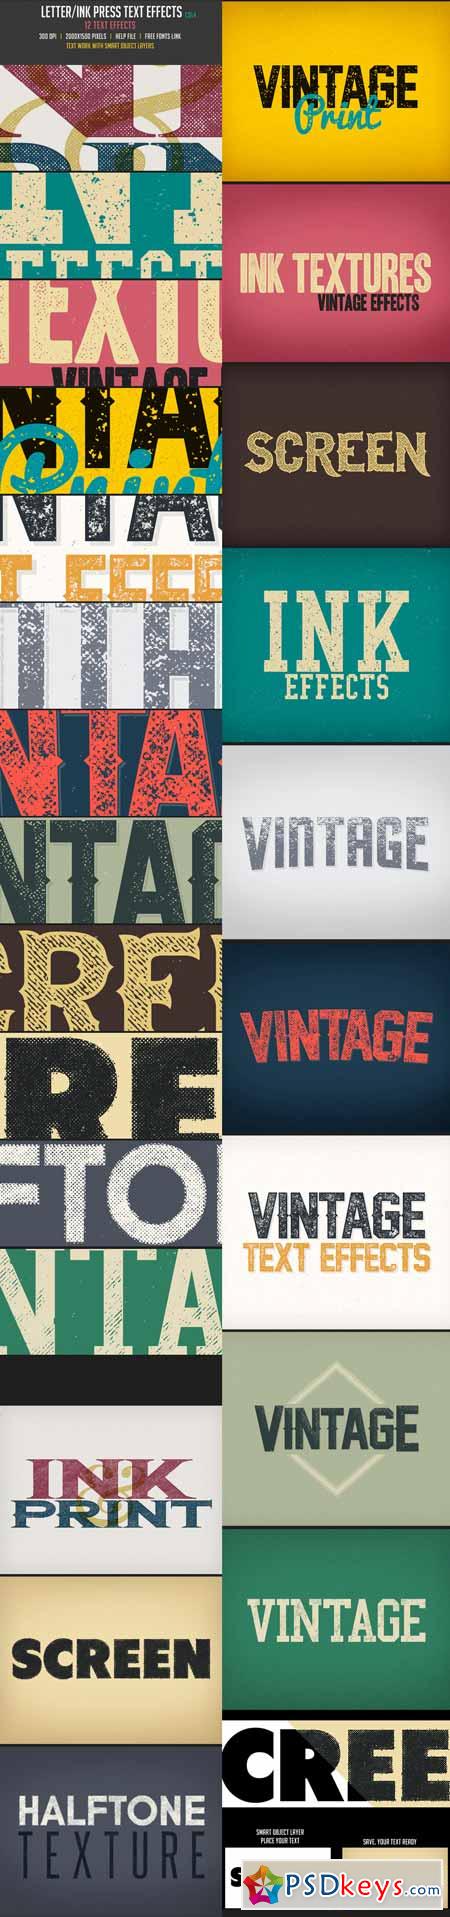 Letter Ink Press Vintage Text Effects 4 11715170